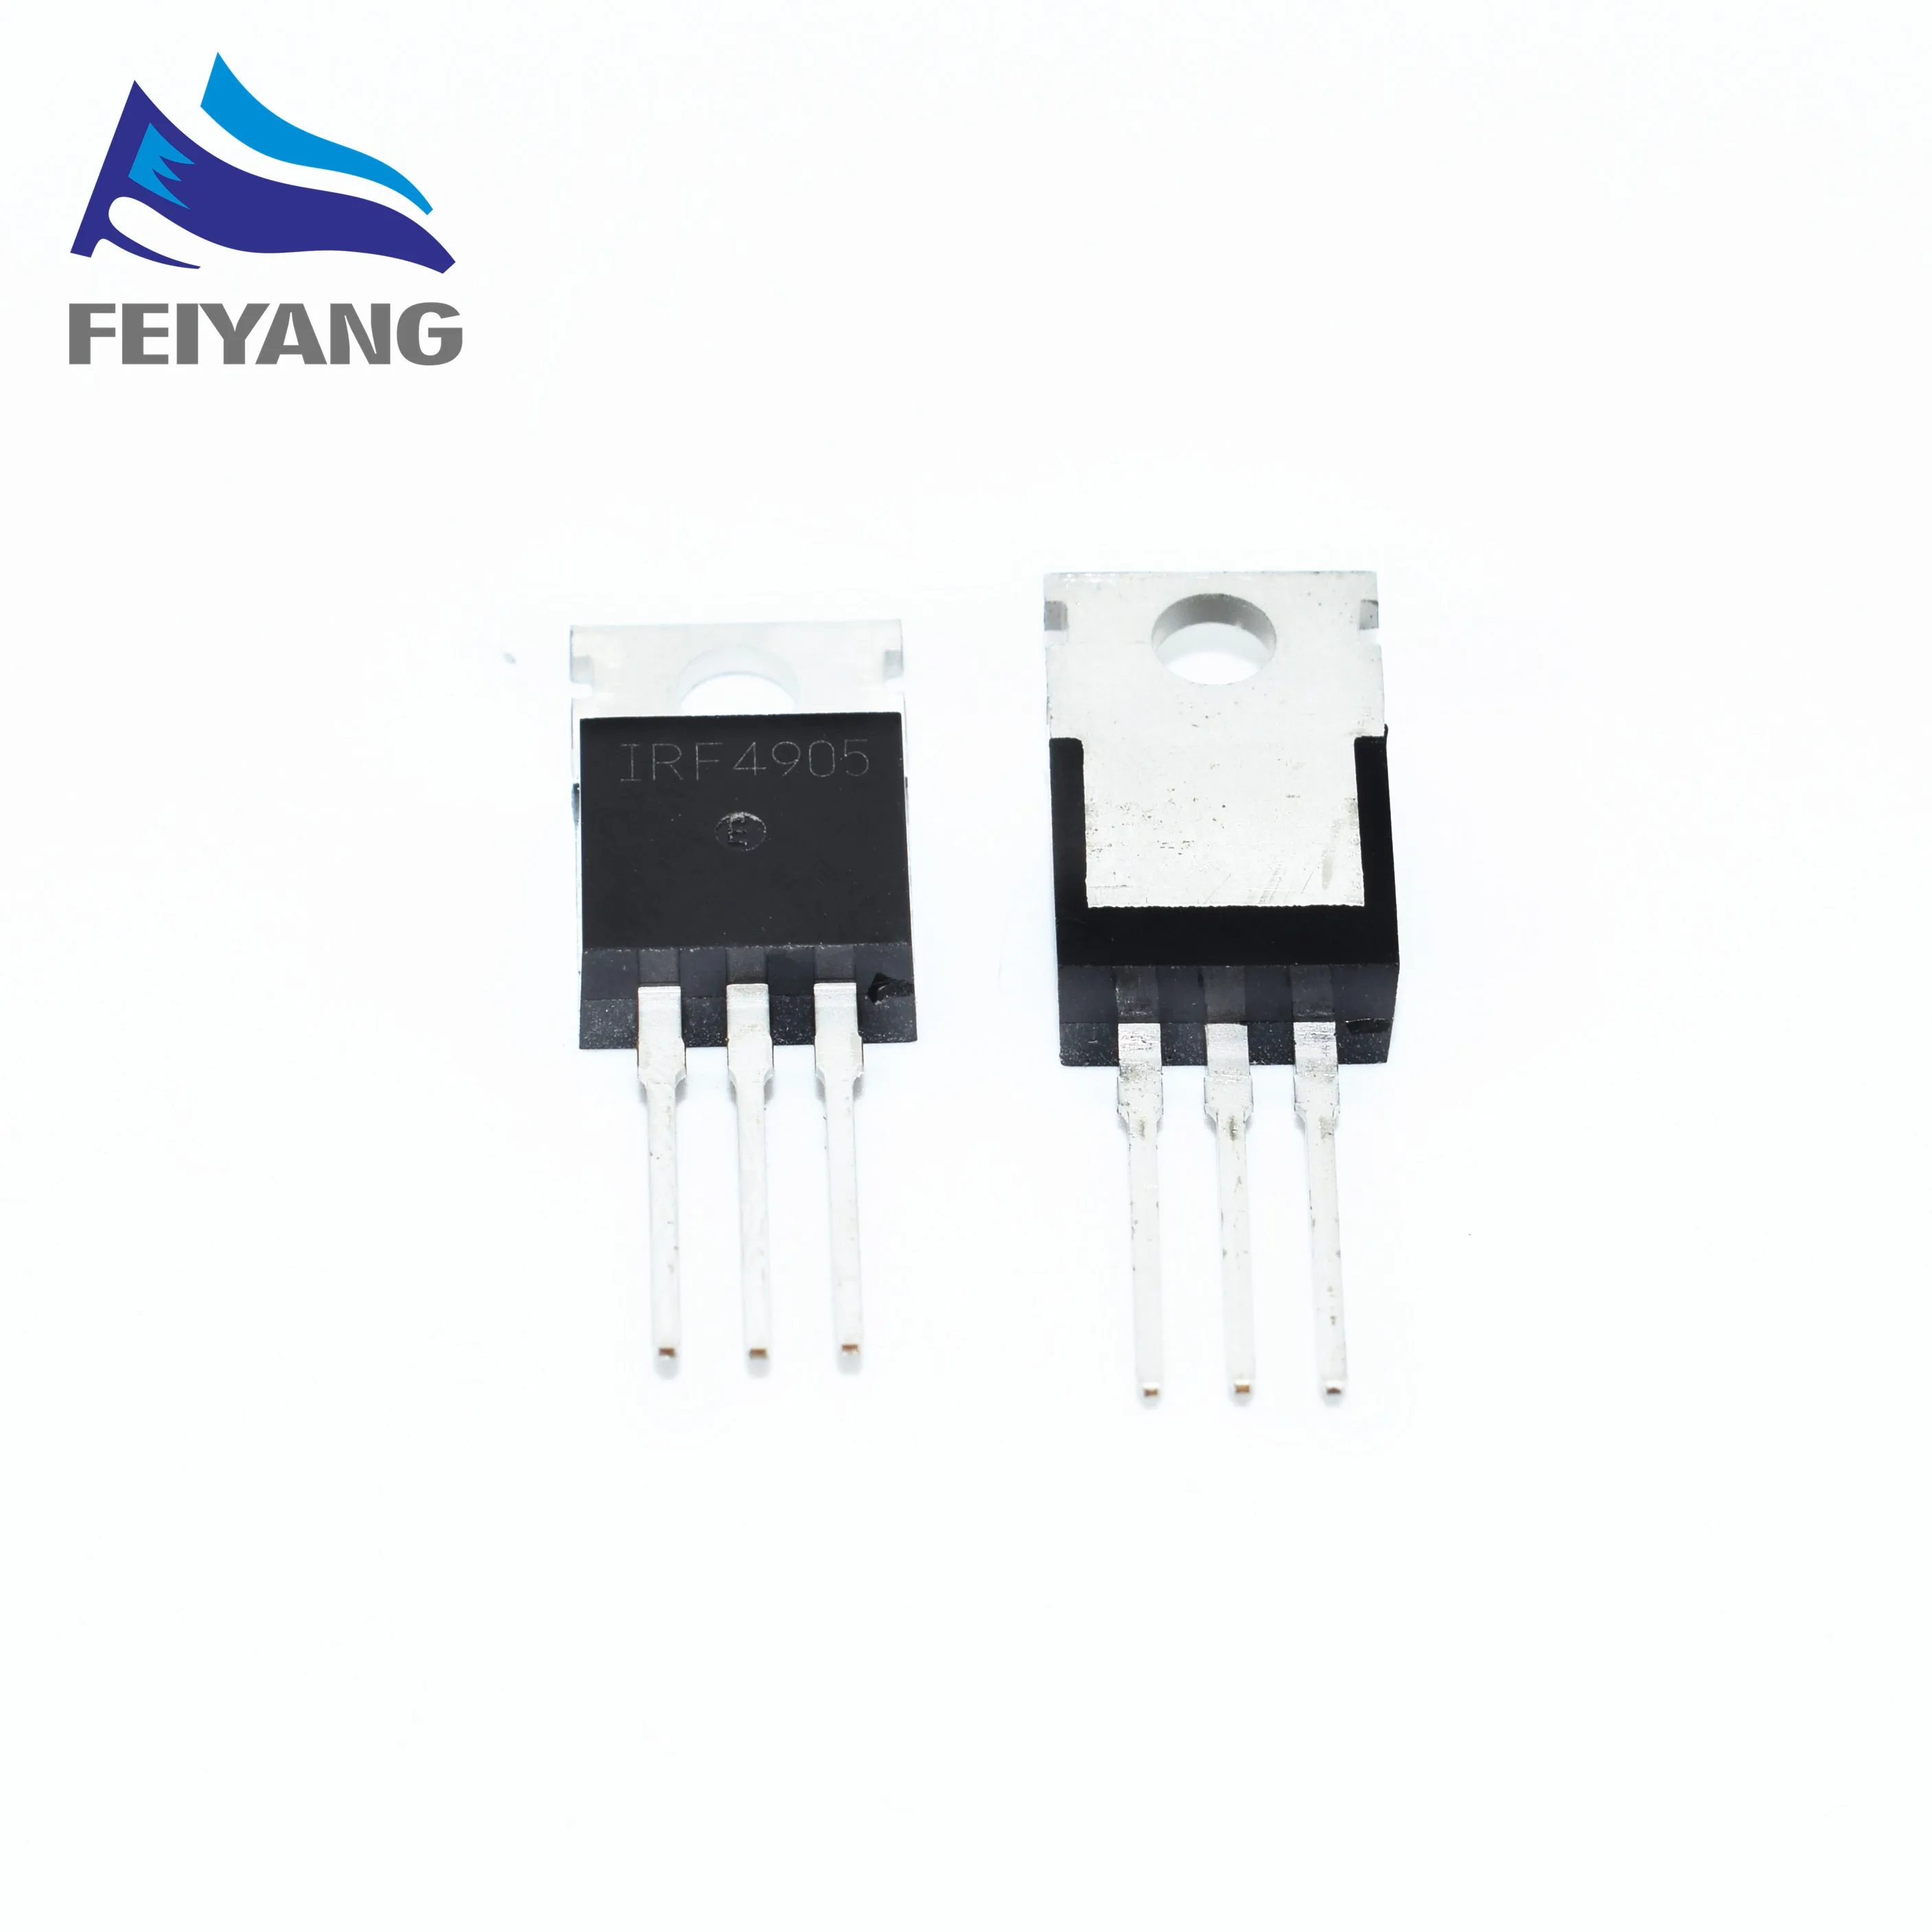 

10PCS/LOT IRF4905 IRF4905PBF TO-220 MOS FET P channel field effect 74A 55V 200W new original Triode Transistor